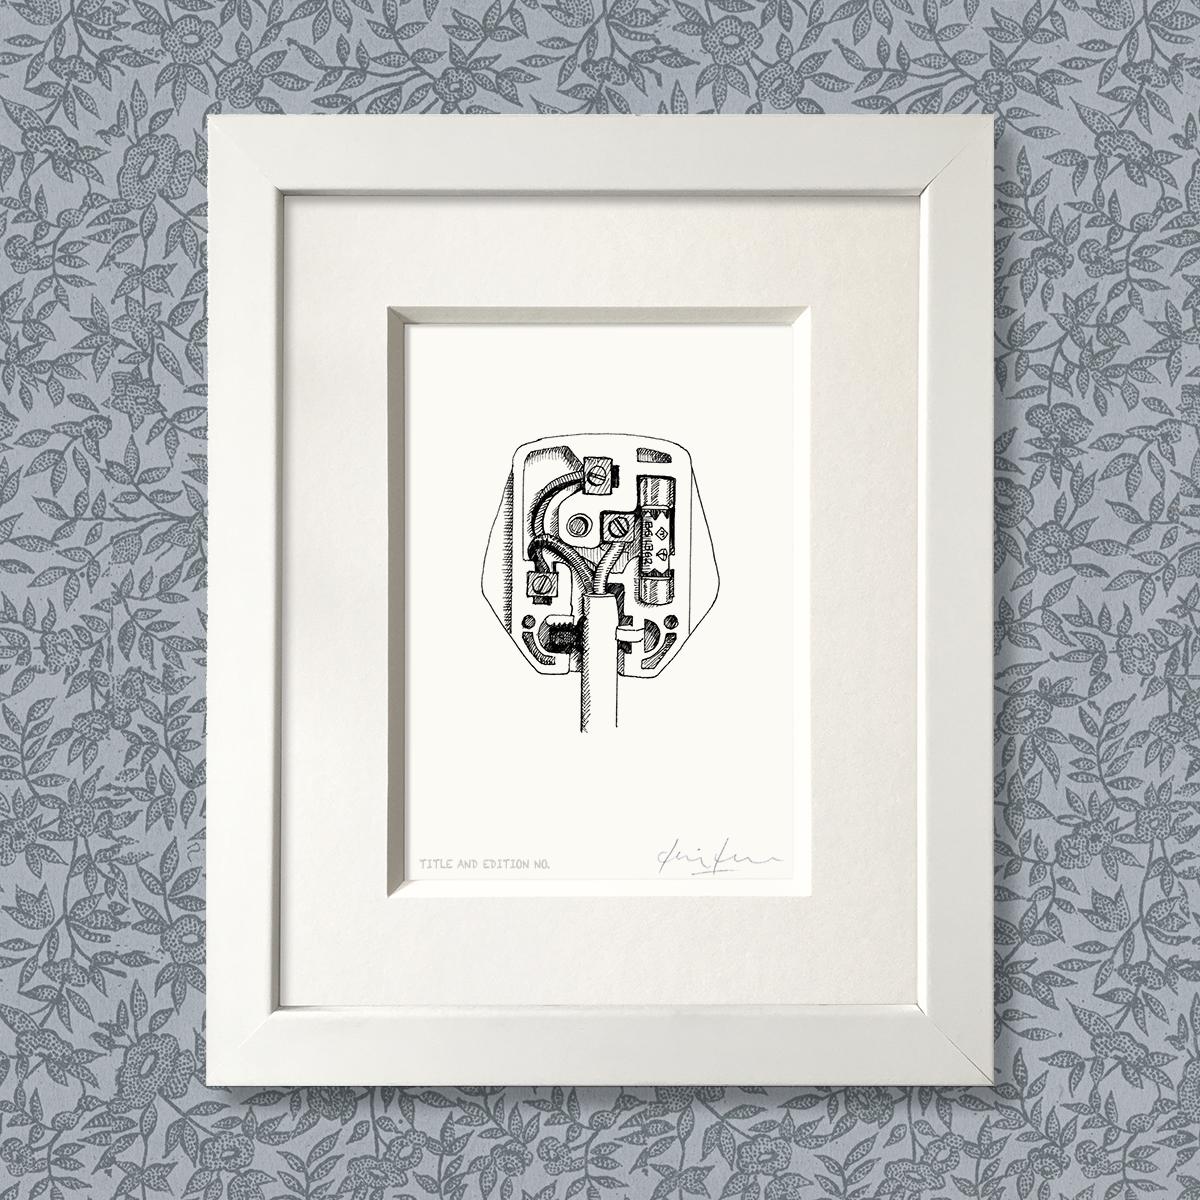 Limited edition print from pen and ink drawing of a 13 amp plug in a white frame